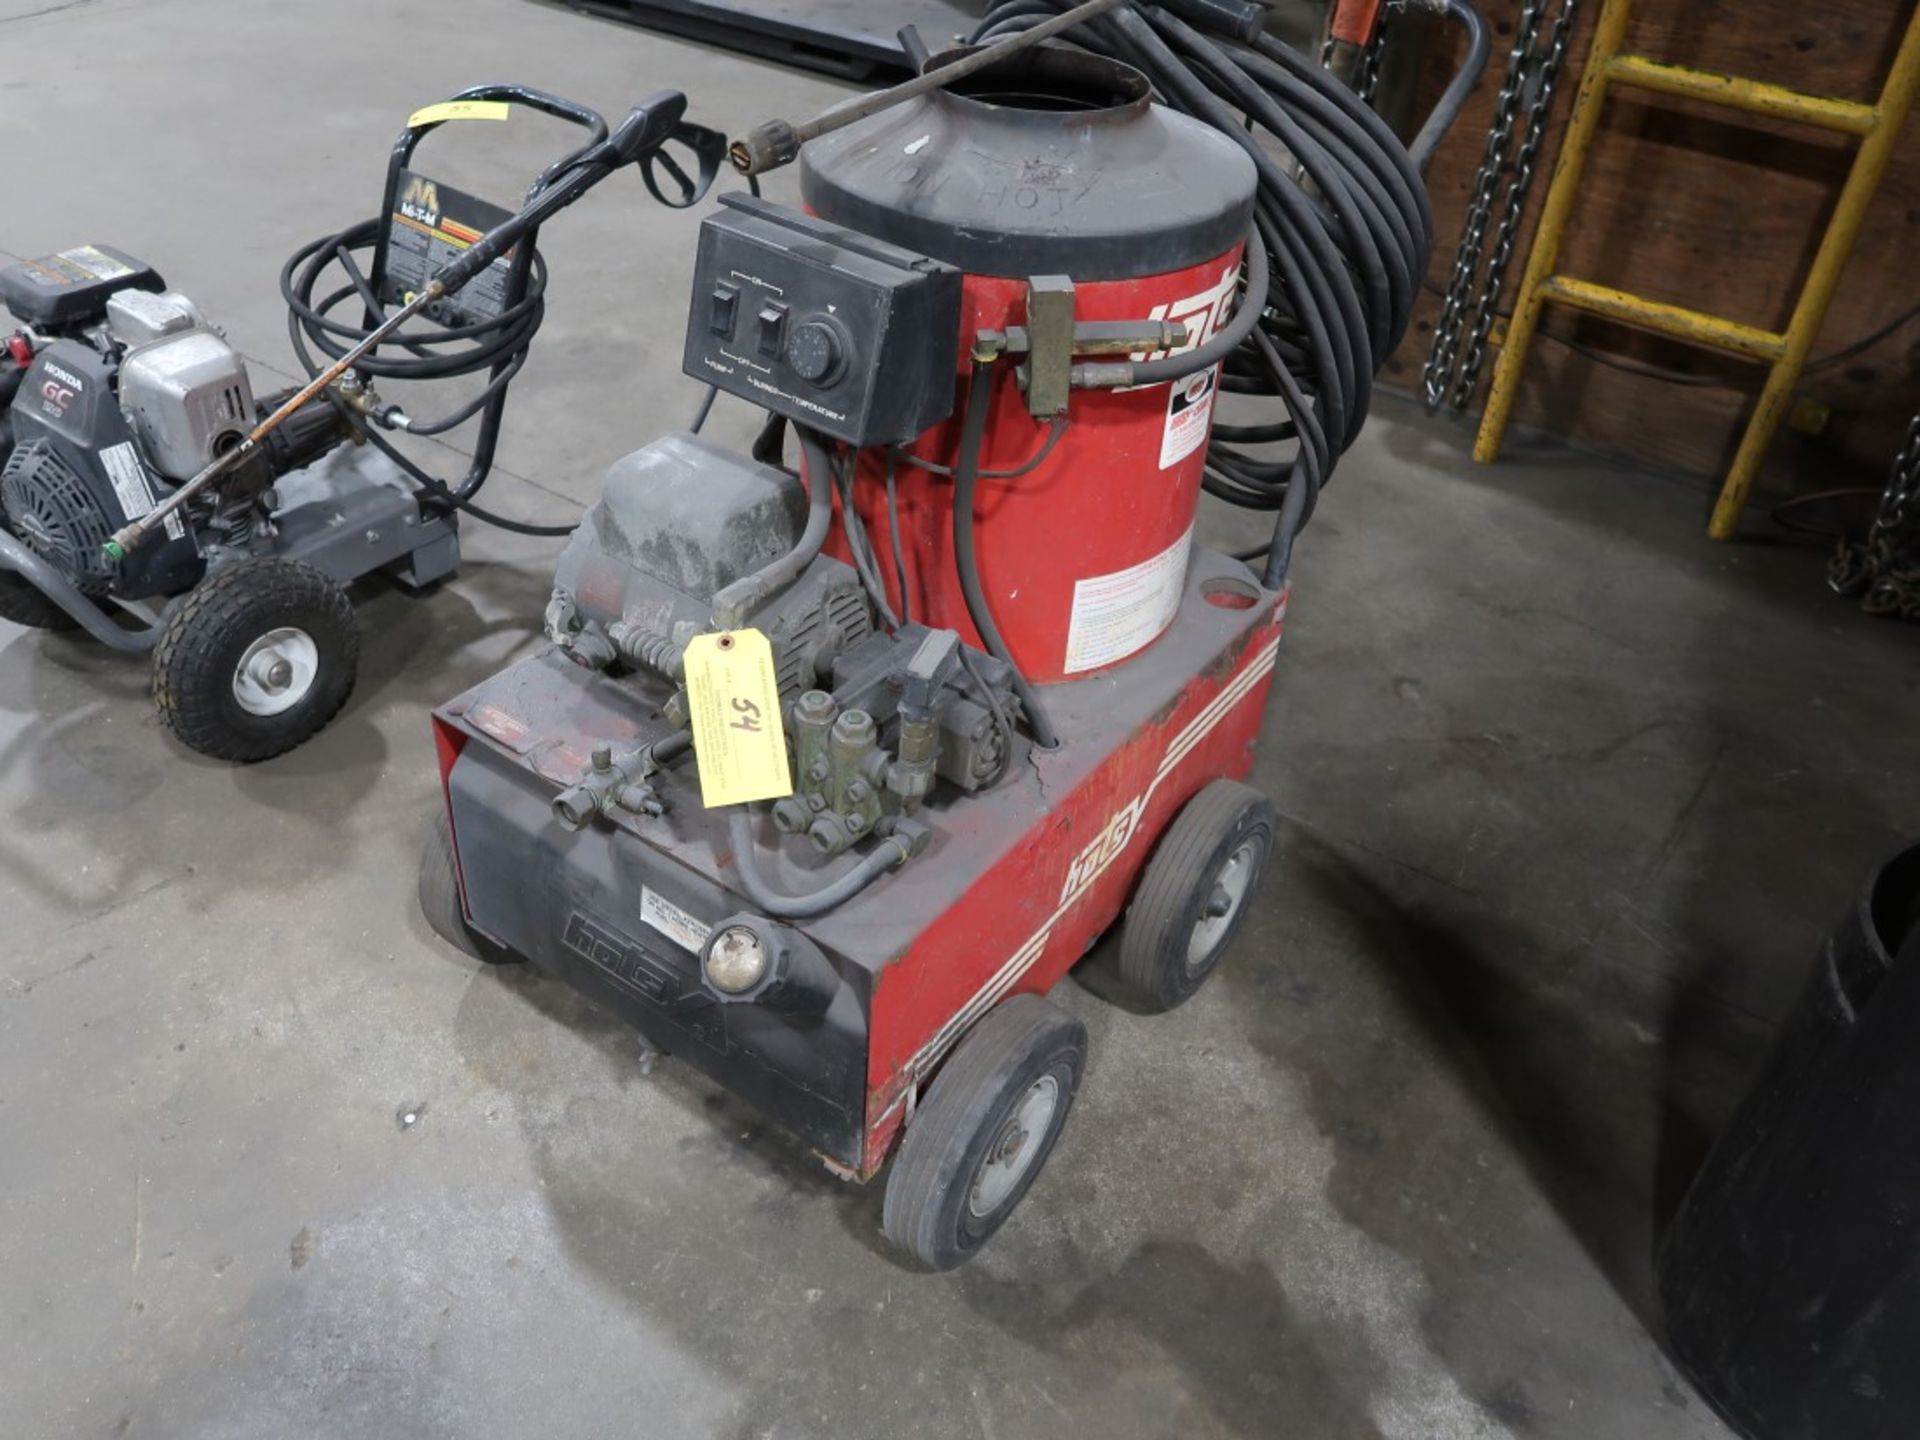 Hotsy Model 550C Hot Water Electric Pressure Washer S/N C43395, 1000 PSI - Image 2 of 2